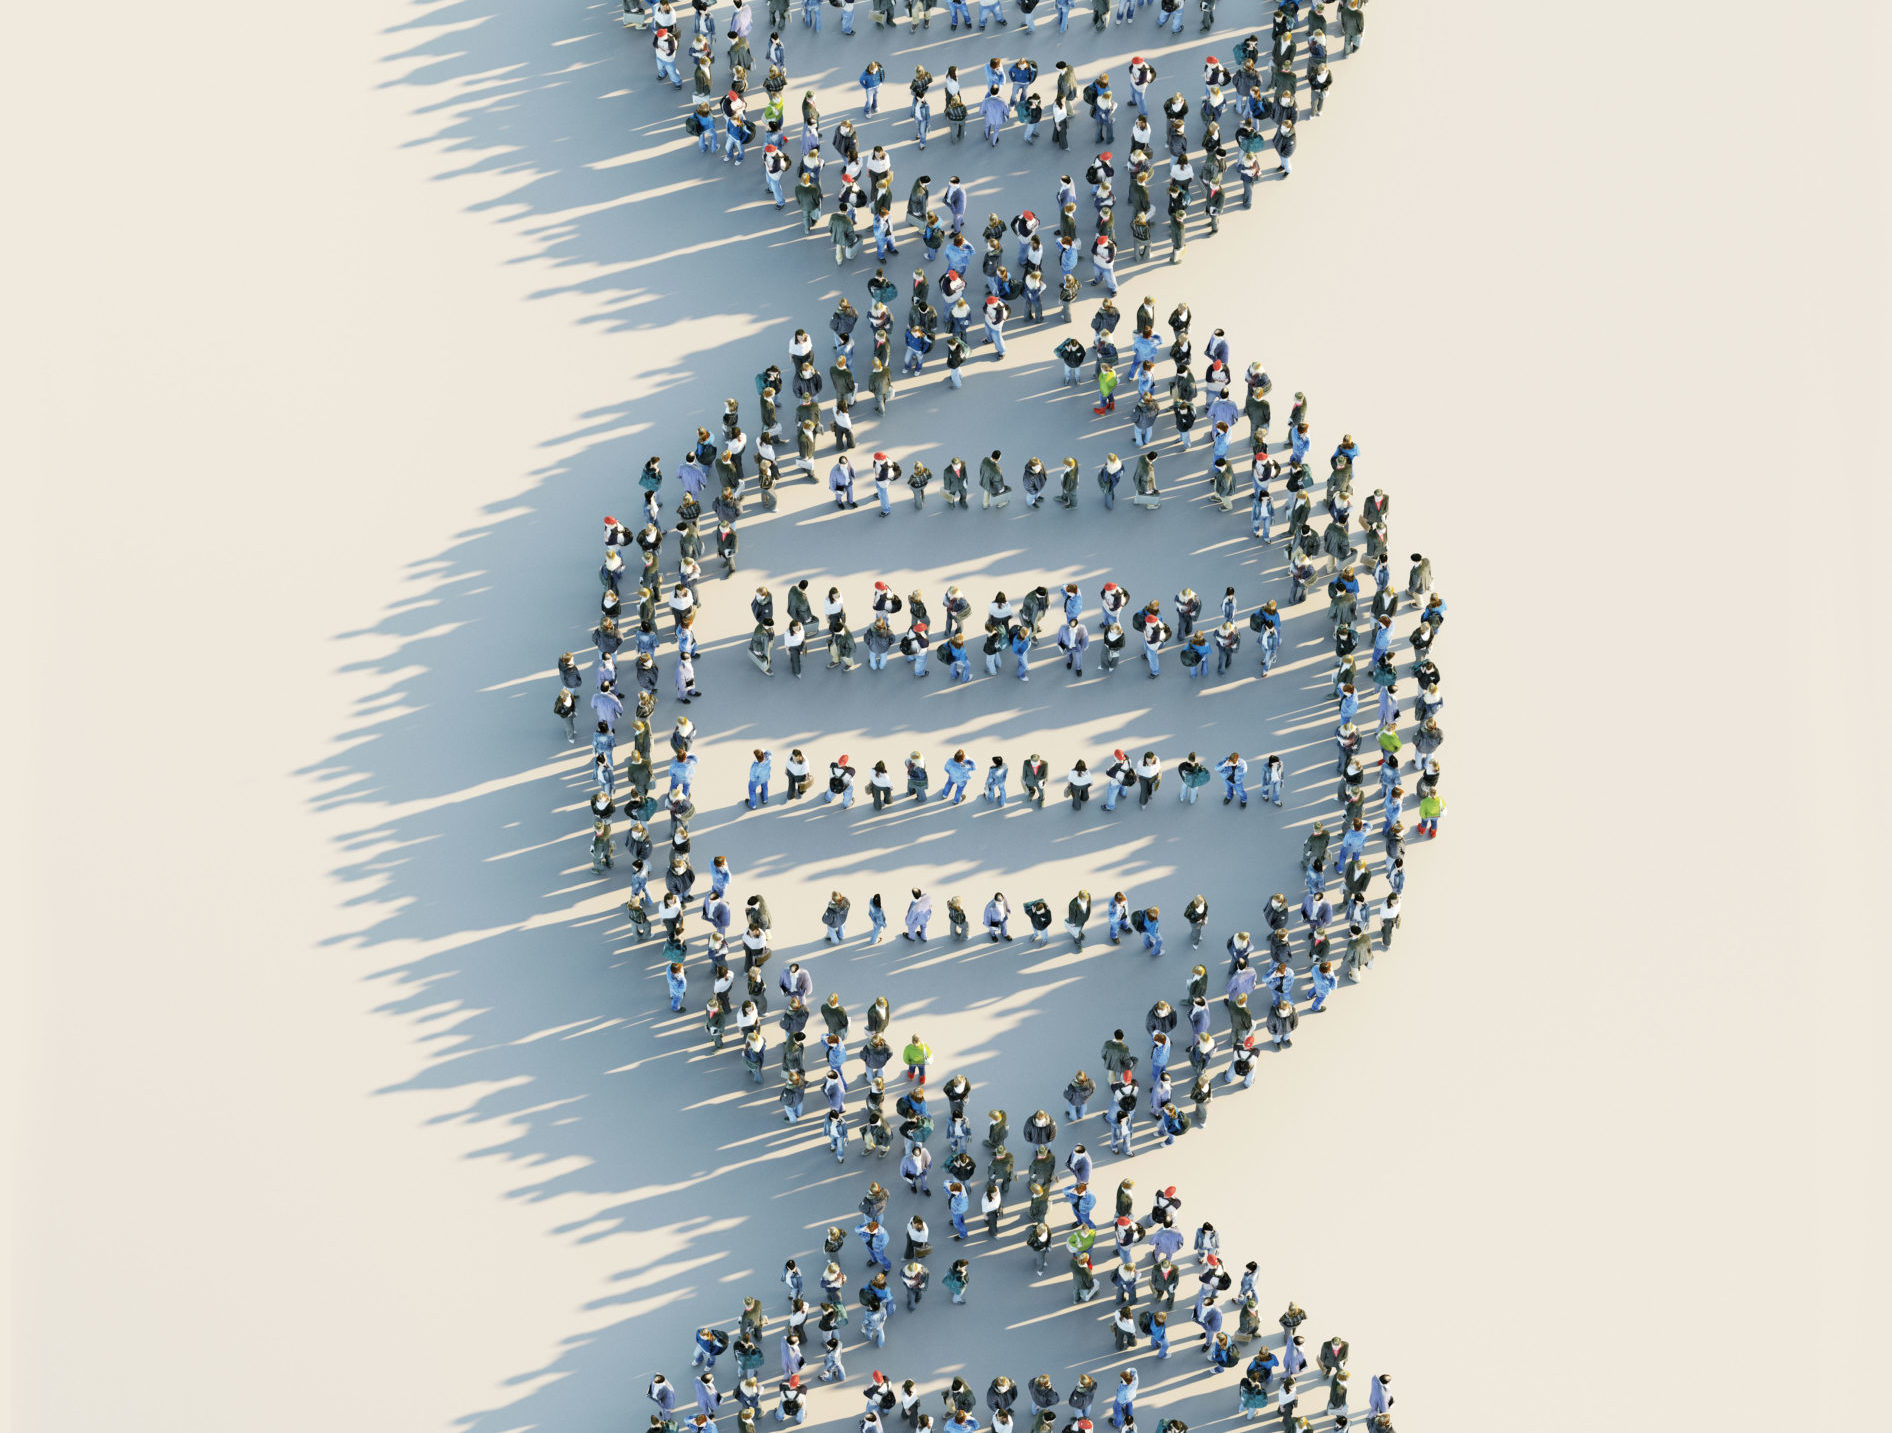 DNA shape made out of people